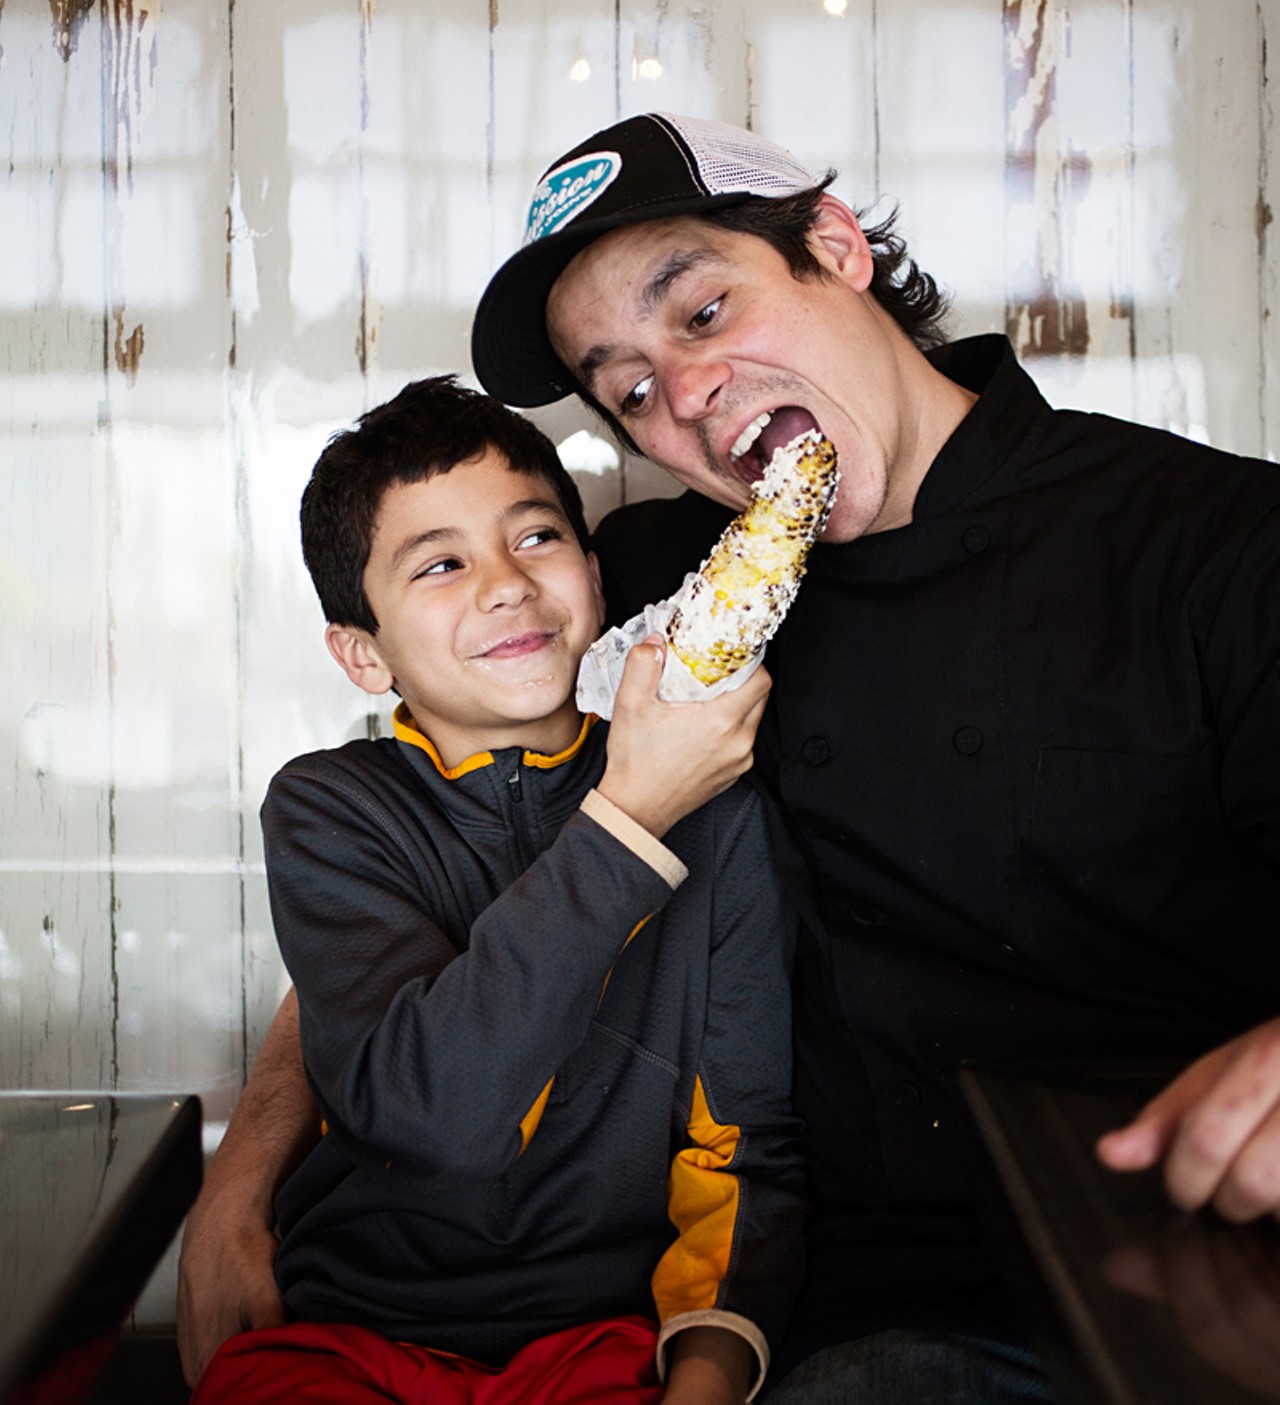 Owner and chef Jason Tilford's ten-year-old son, Julian, eating some roasted street corn.